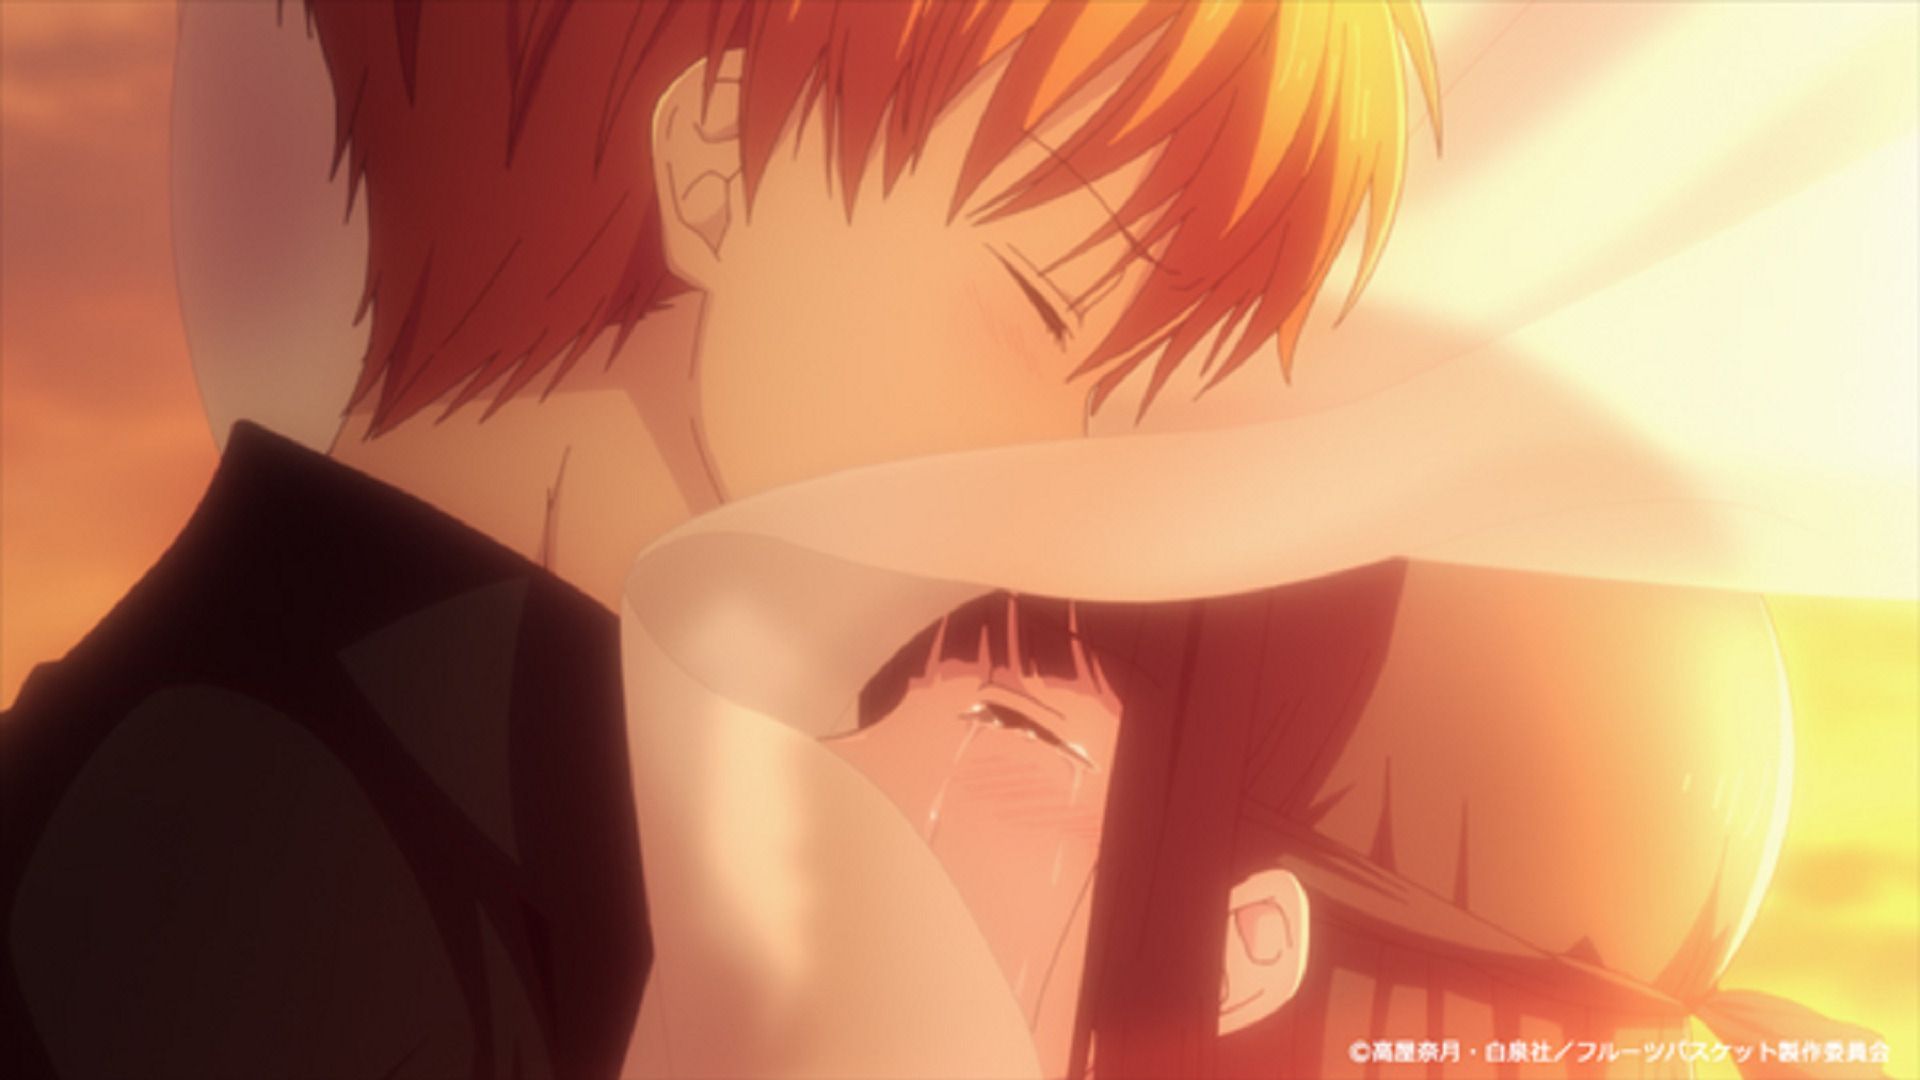 Fruits Basket: the Final Episode 6 Preview Image Released